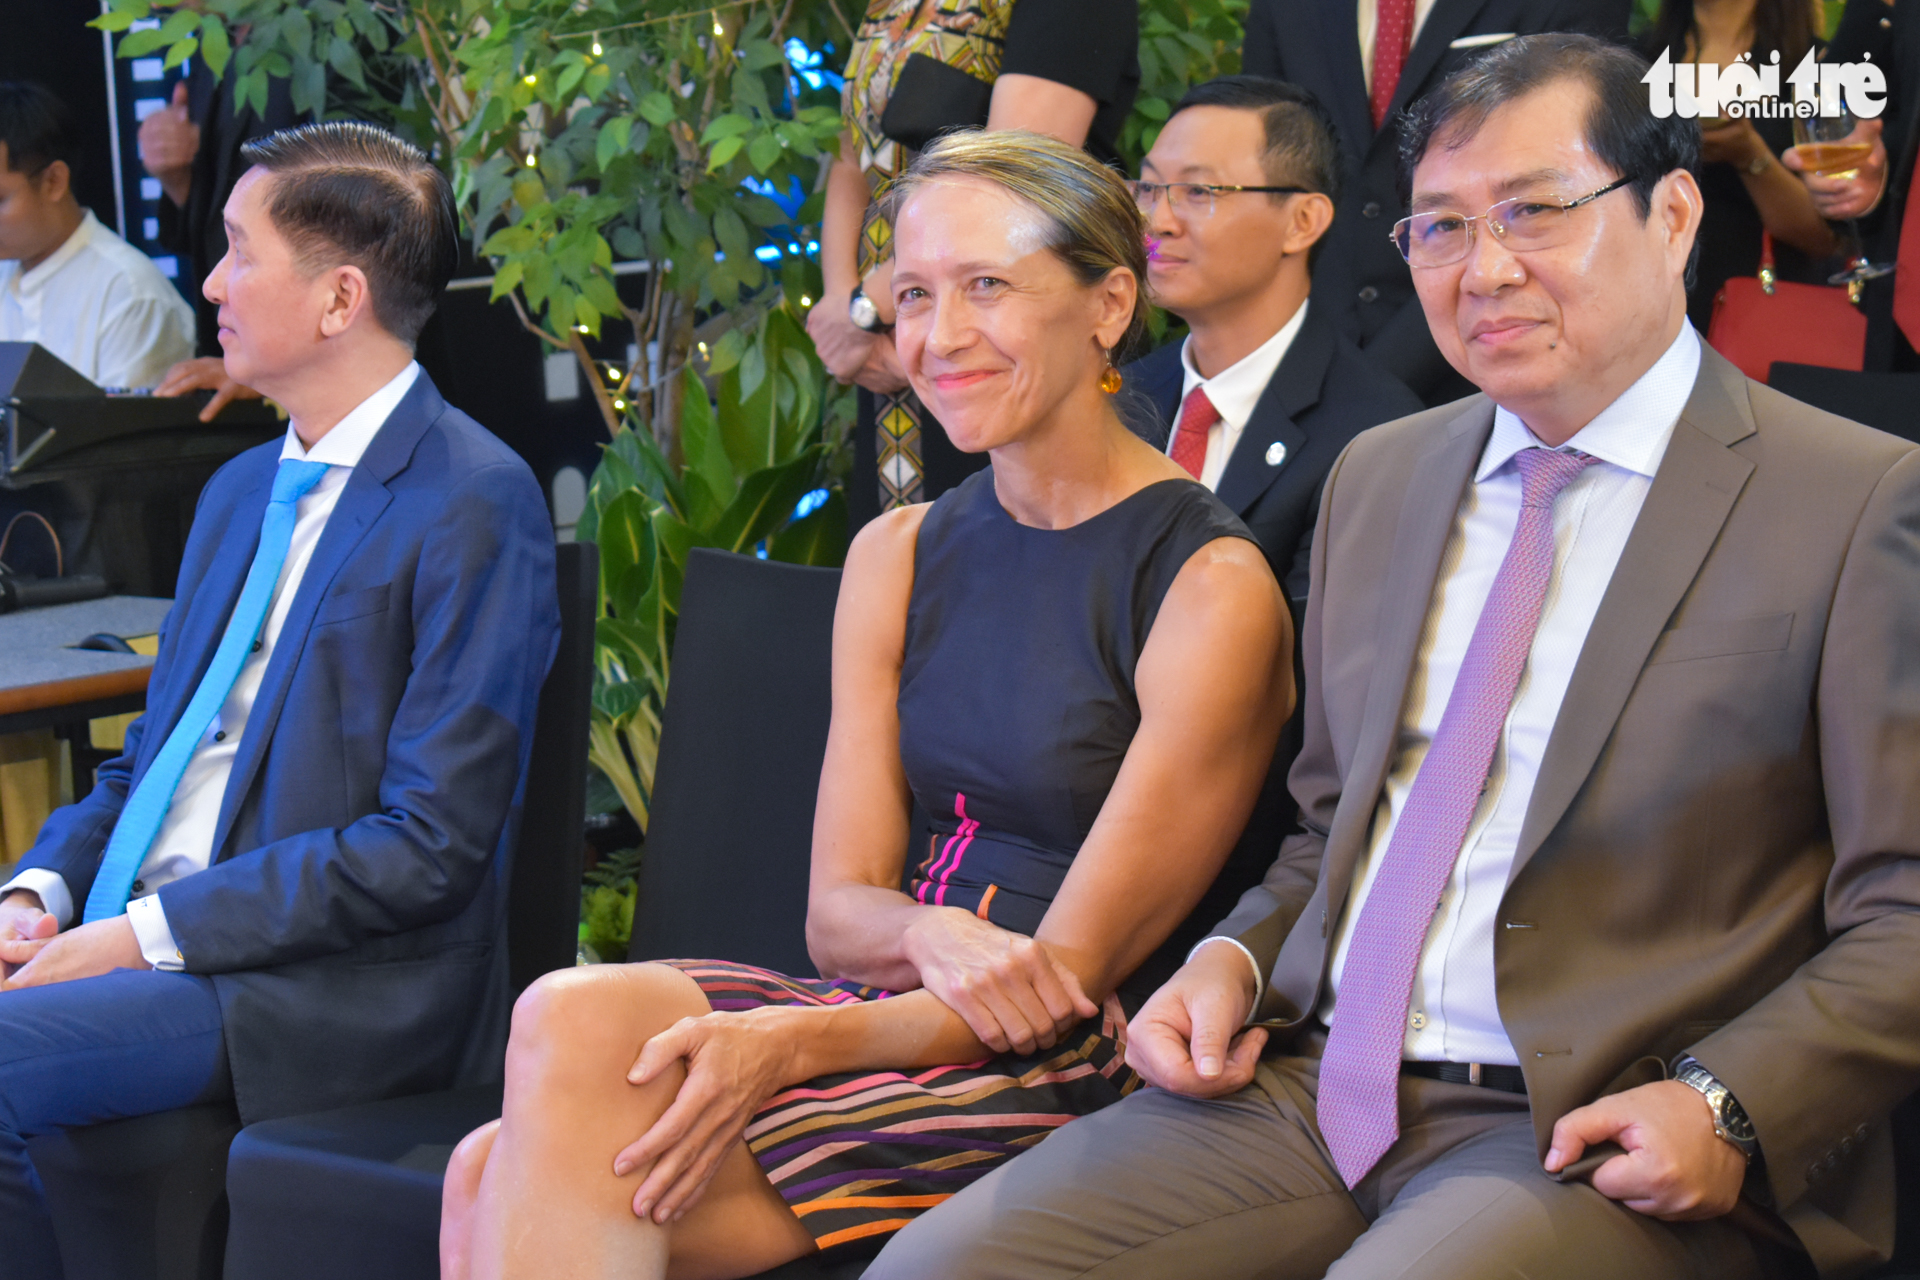 U.S. Consul General in Ho Chi Minh City Mary Tarnowka (C) and Da Nang chairman Huynh Duc Tho (R) react during a speech by U.S. Ambassador to Vietnam Daniel Kritenbrink at an event celebrating the 243rd U.S. Independence Day in Ho Chi Minh City on June 5, 2019. Photo: Tuan Son / Tuoi Tre News